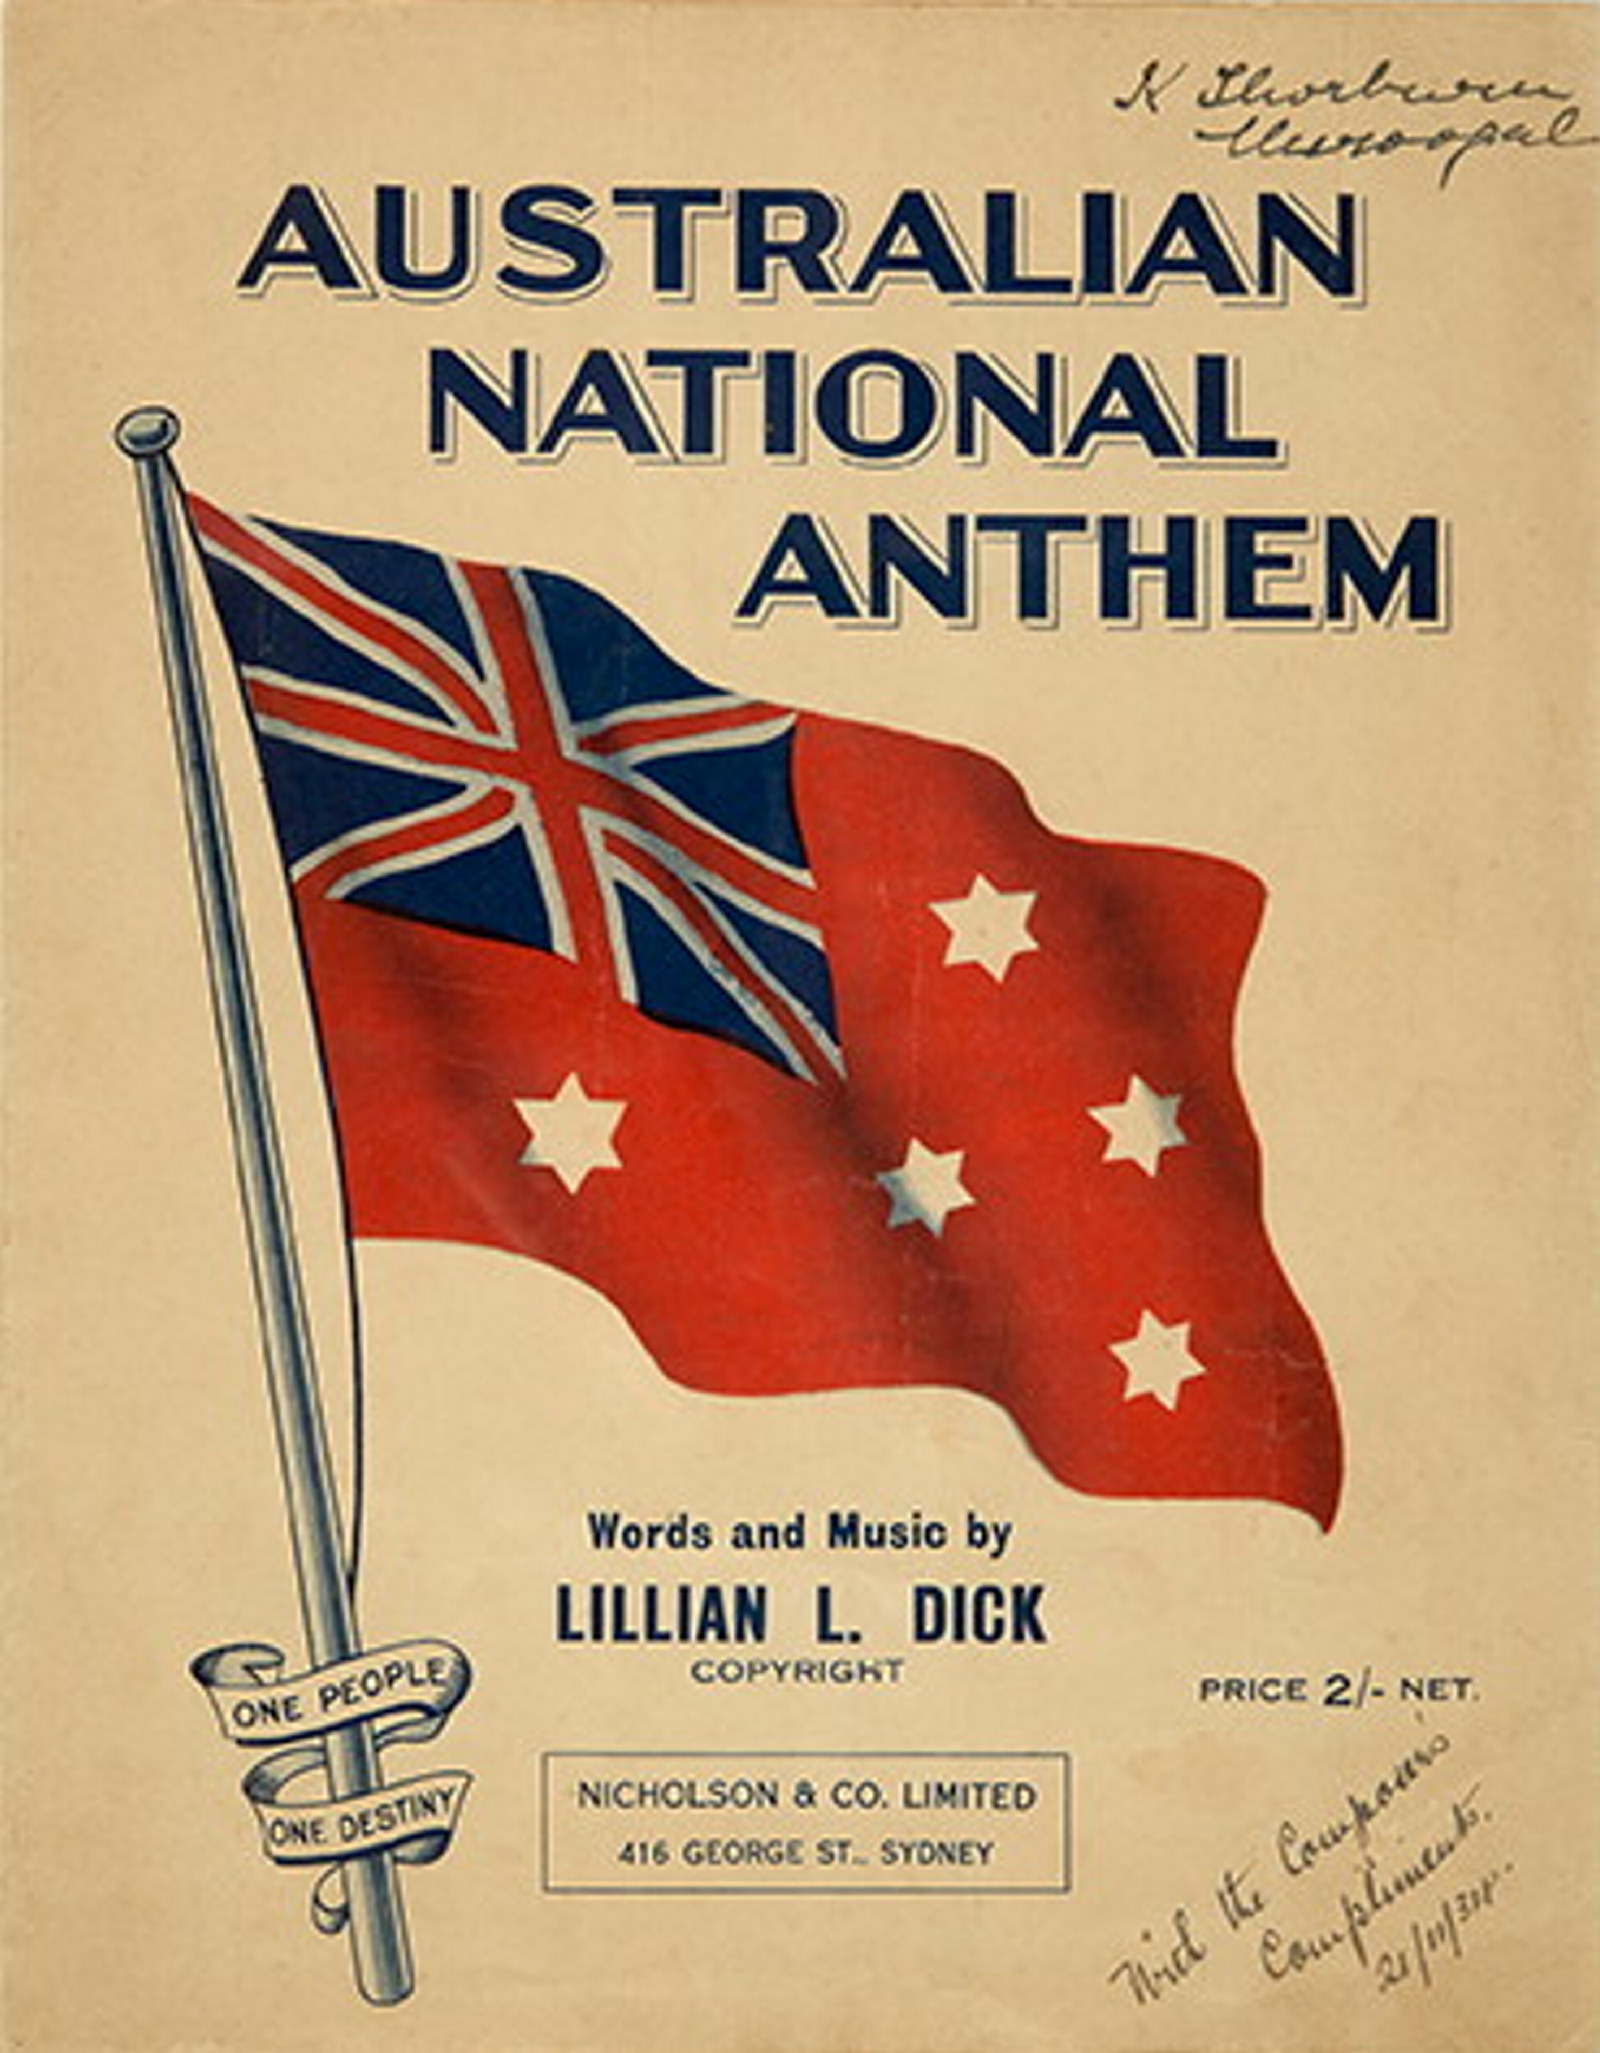 The red ensign version of the Australian flag on cover of sheet music book.